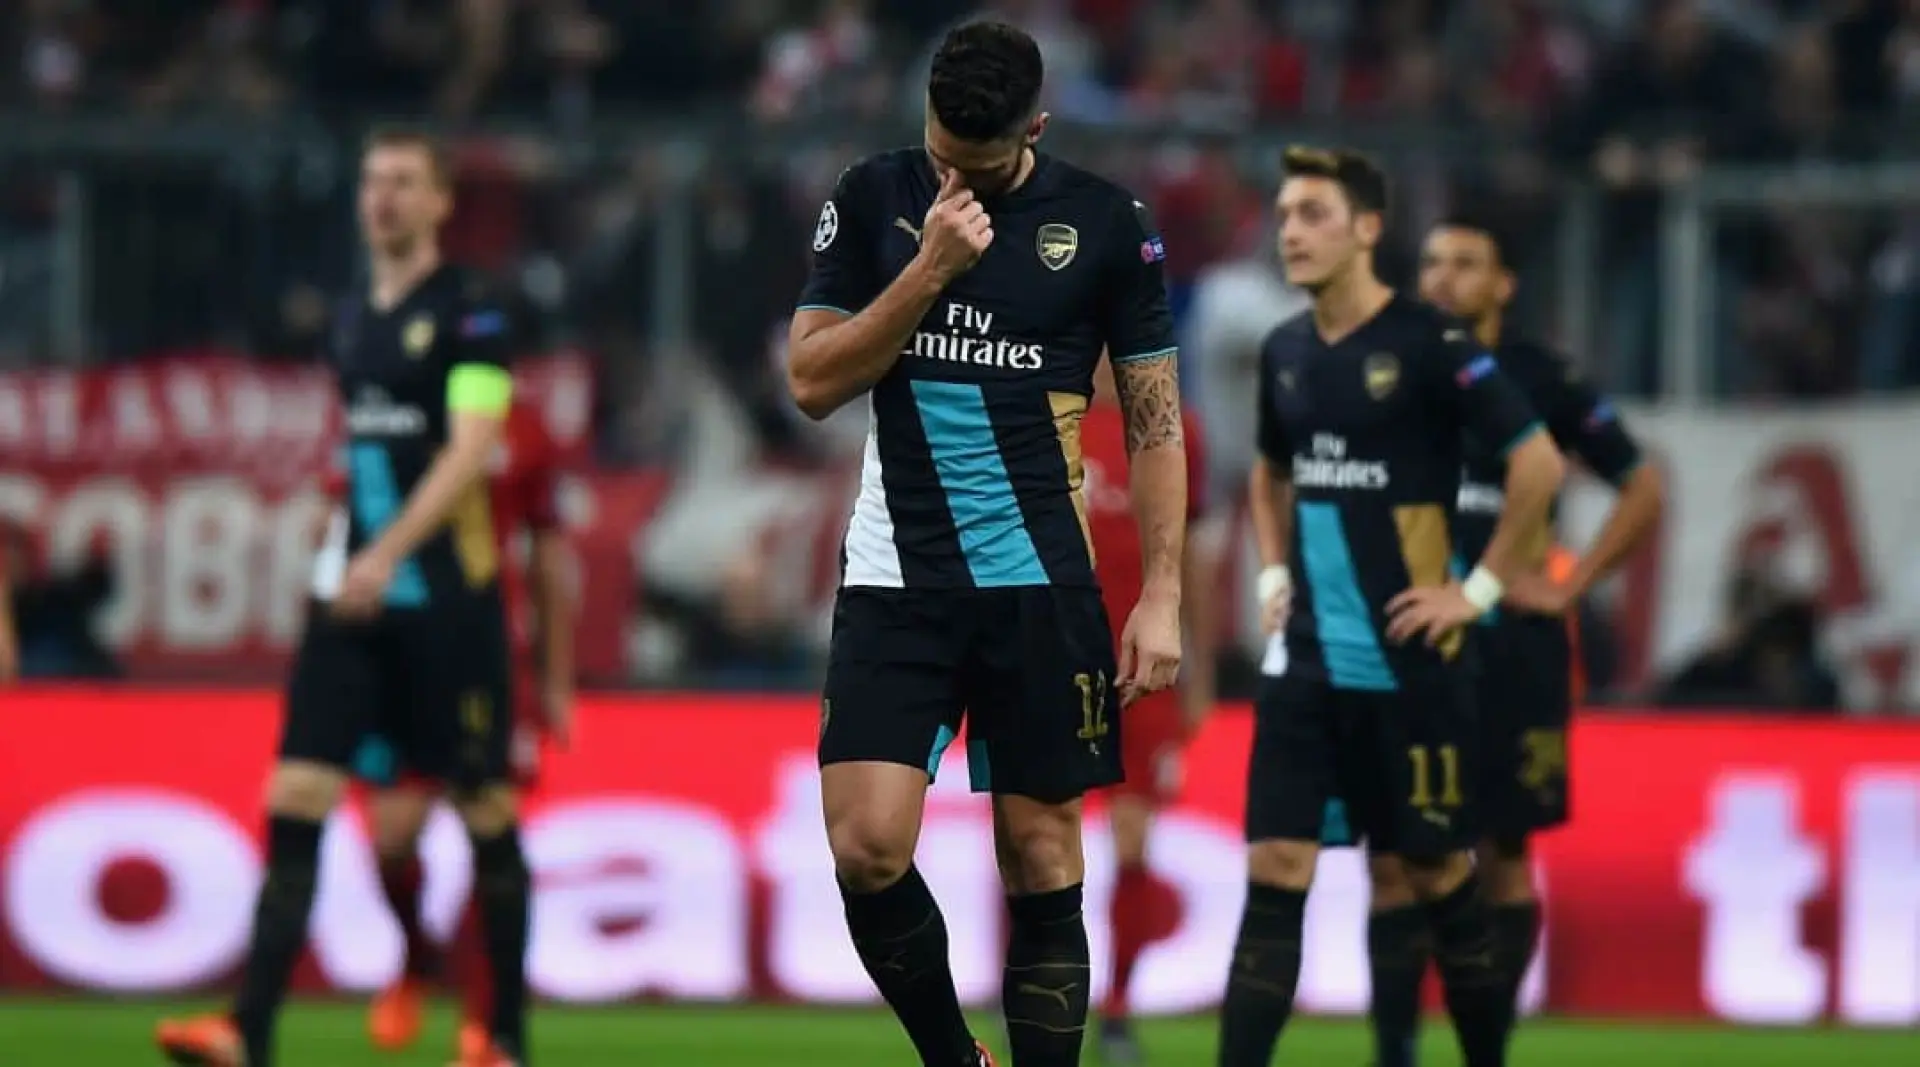 Olivier Giroud and his Arsenal teammates react to defeat at Bayern Munich